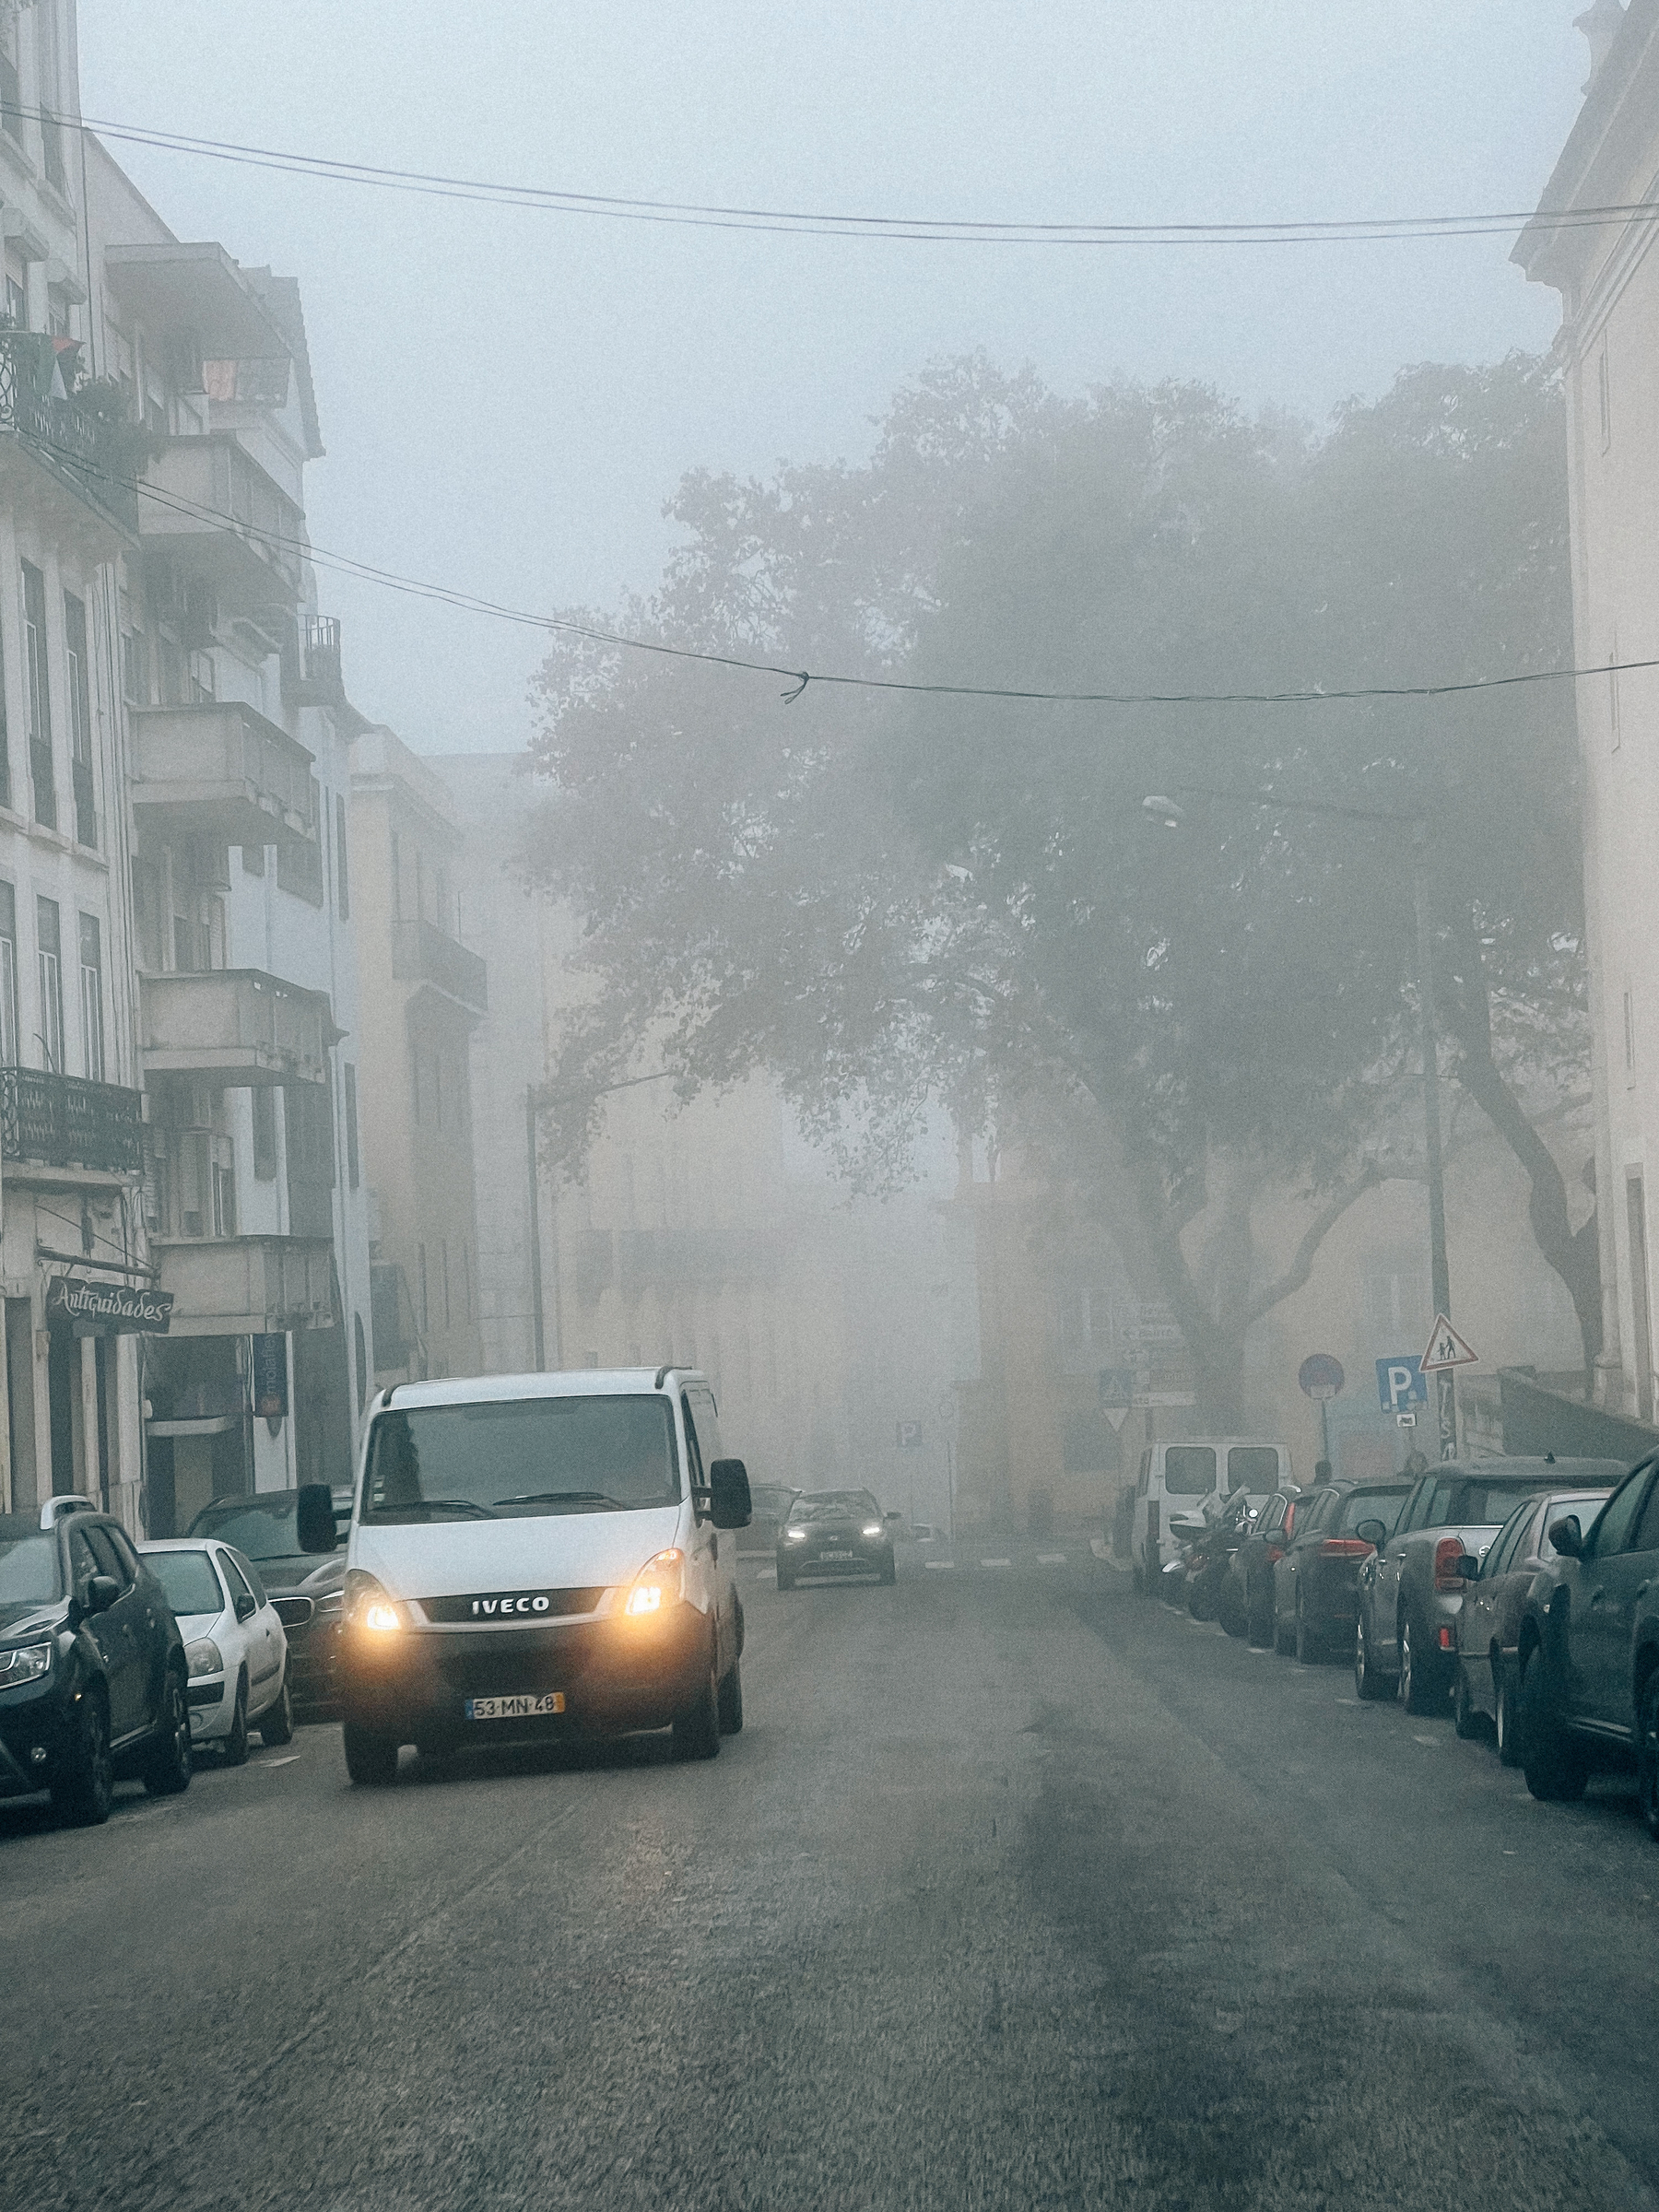 A foggy street with parked cars lining both sides, a white IVECO van with its headlights on is in the foreground driving towards the camera, and faint outlines of buildings and trees are visible in the background.